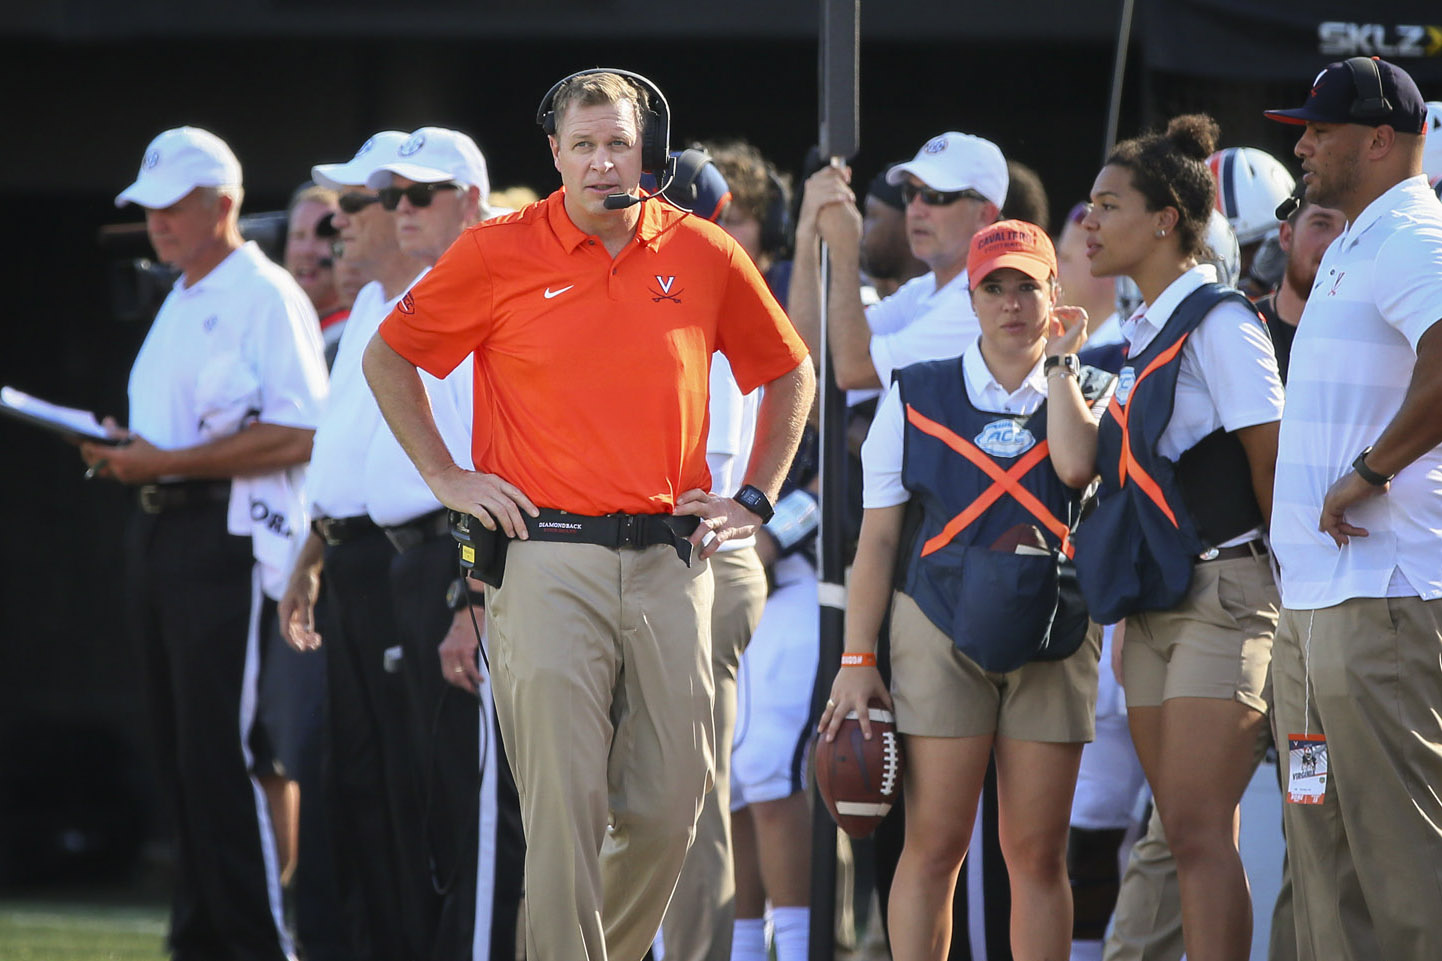 Coach Mendenhall walking the sideline during a football game